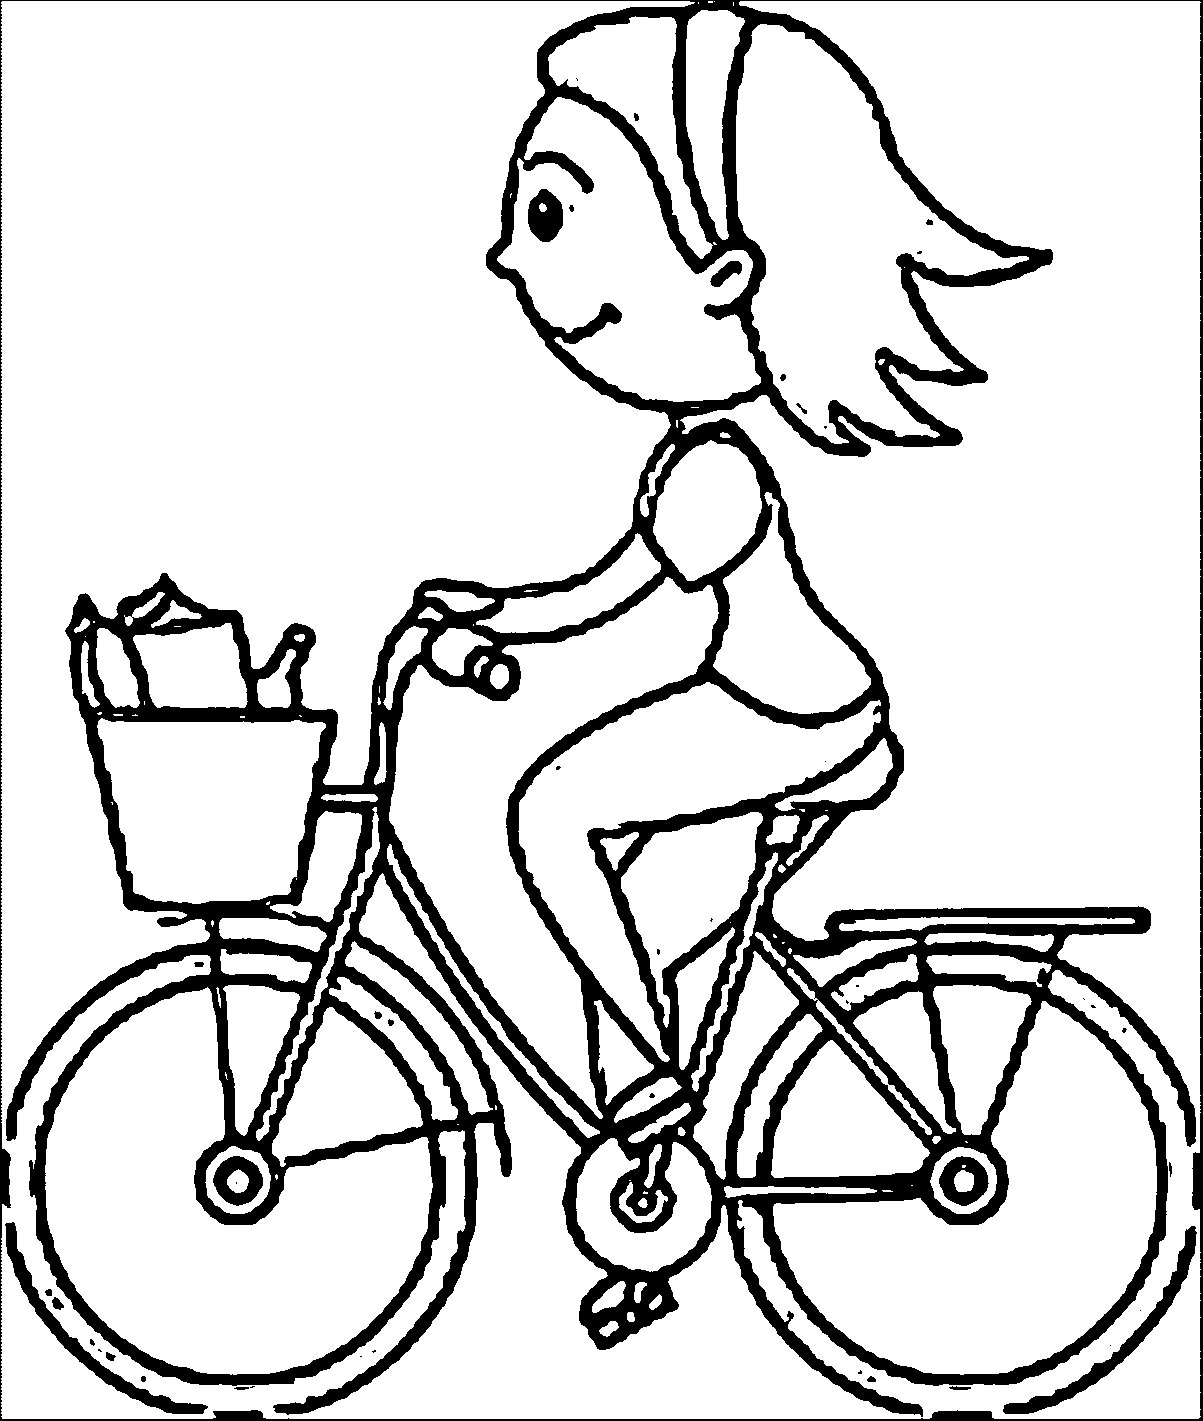 Riding Bicycle With Full Basket Coloring Page